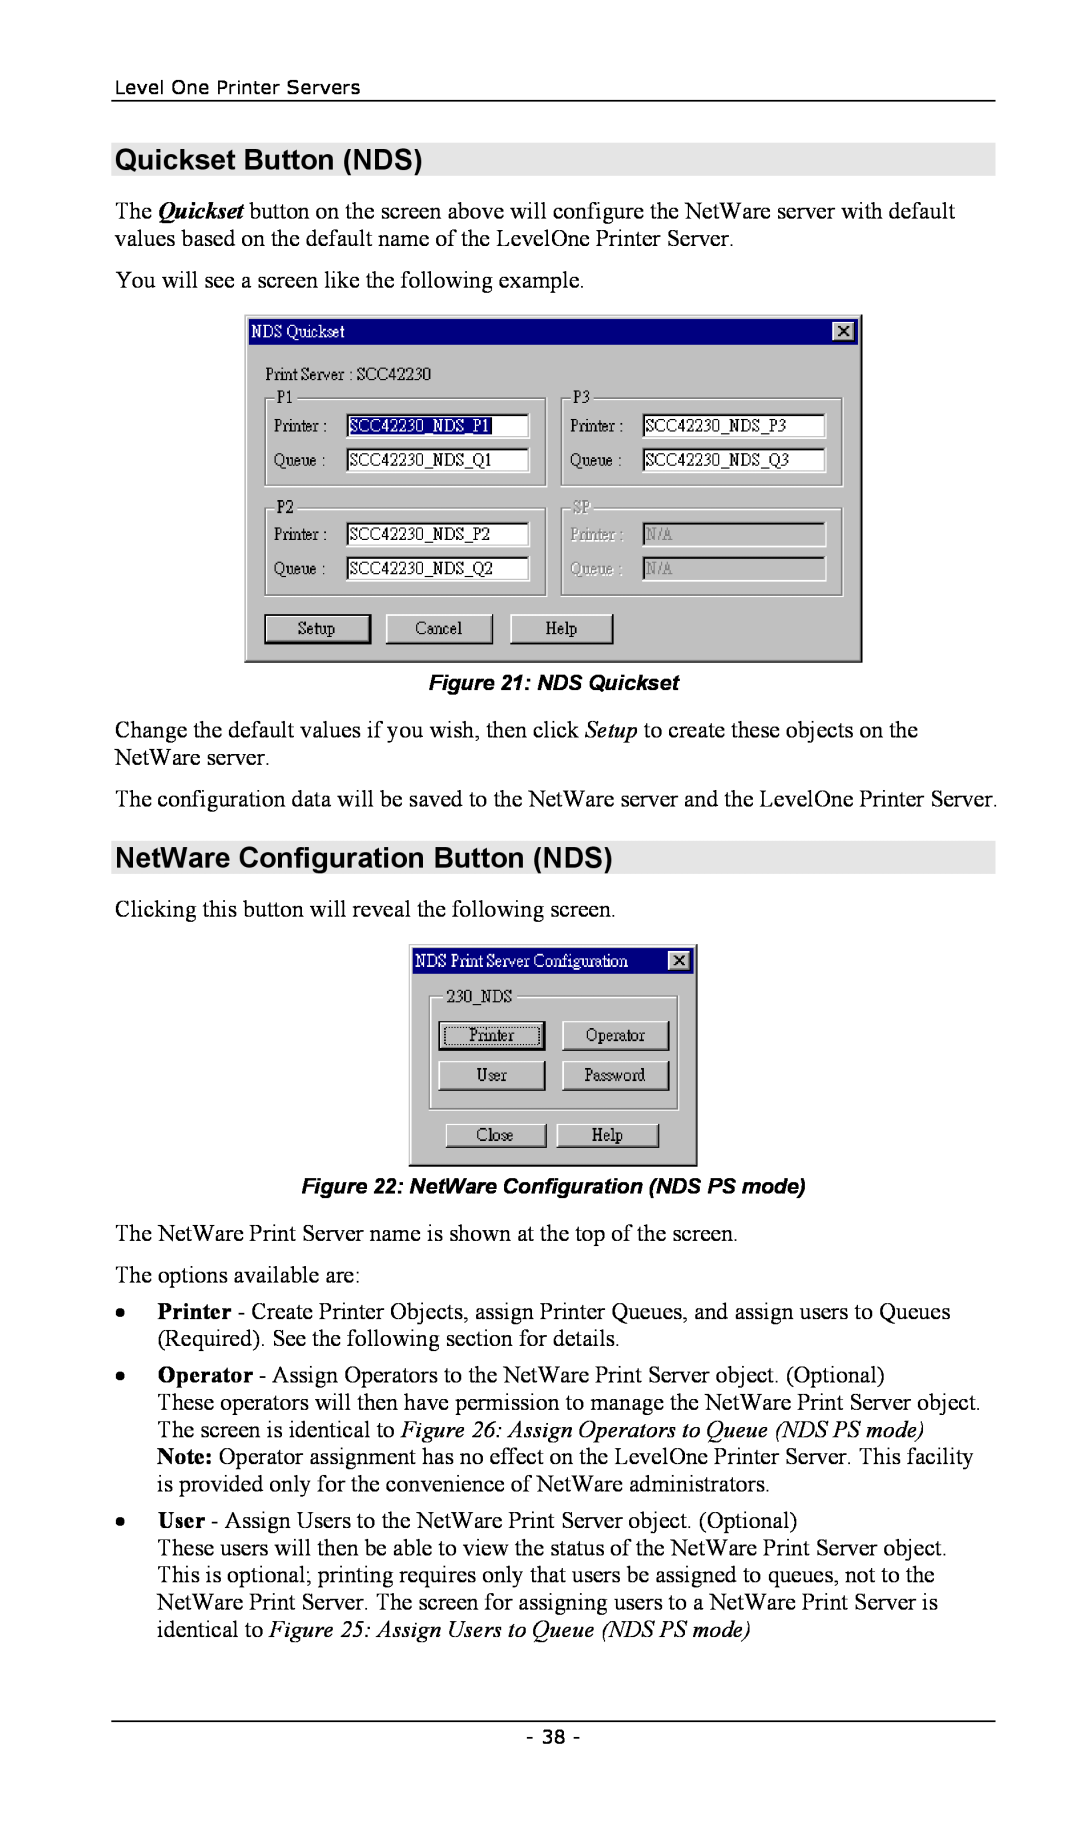 LevelOne EPS-3001TU Quickset Button NDS, NetWare Configuration Button NDS, NDS Quickset, NetWare Configuration NDS PS mode 